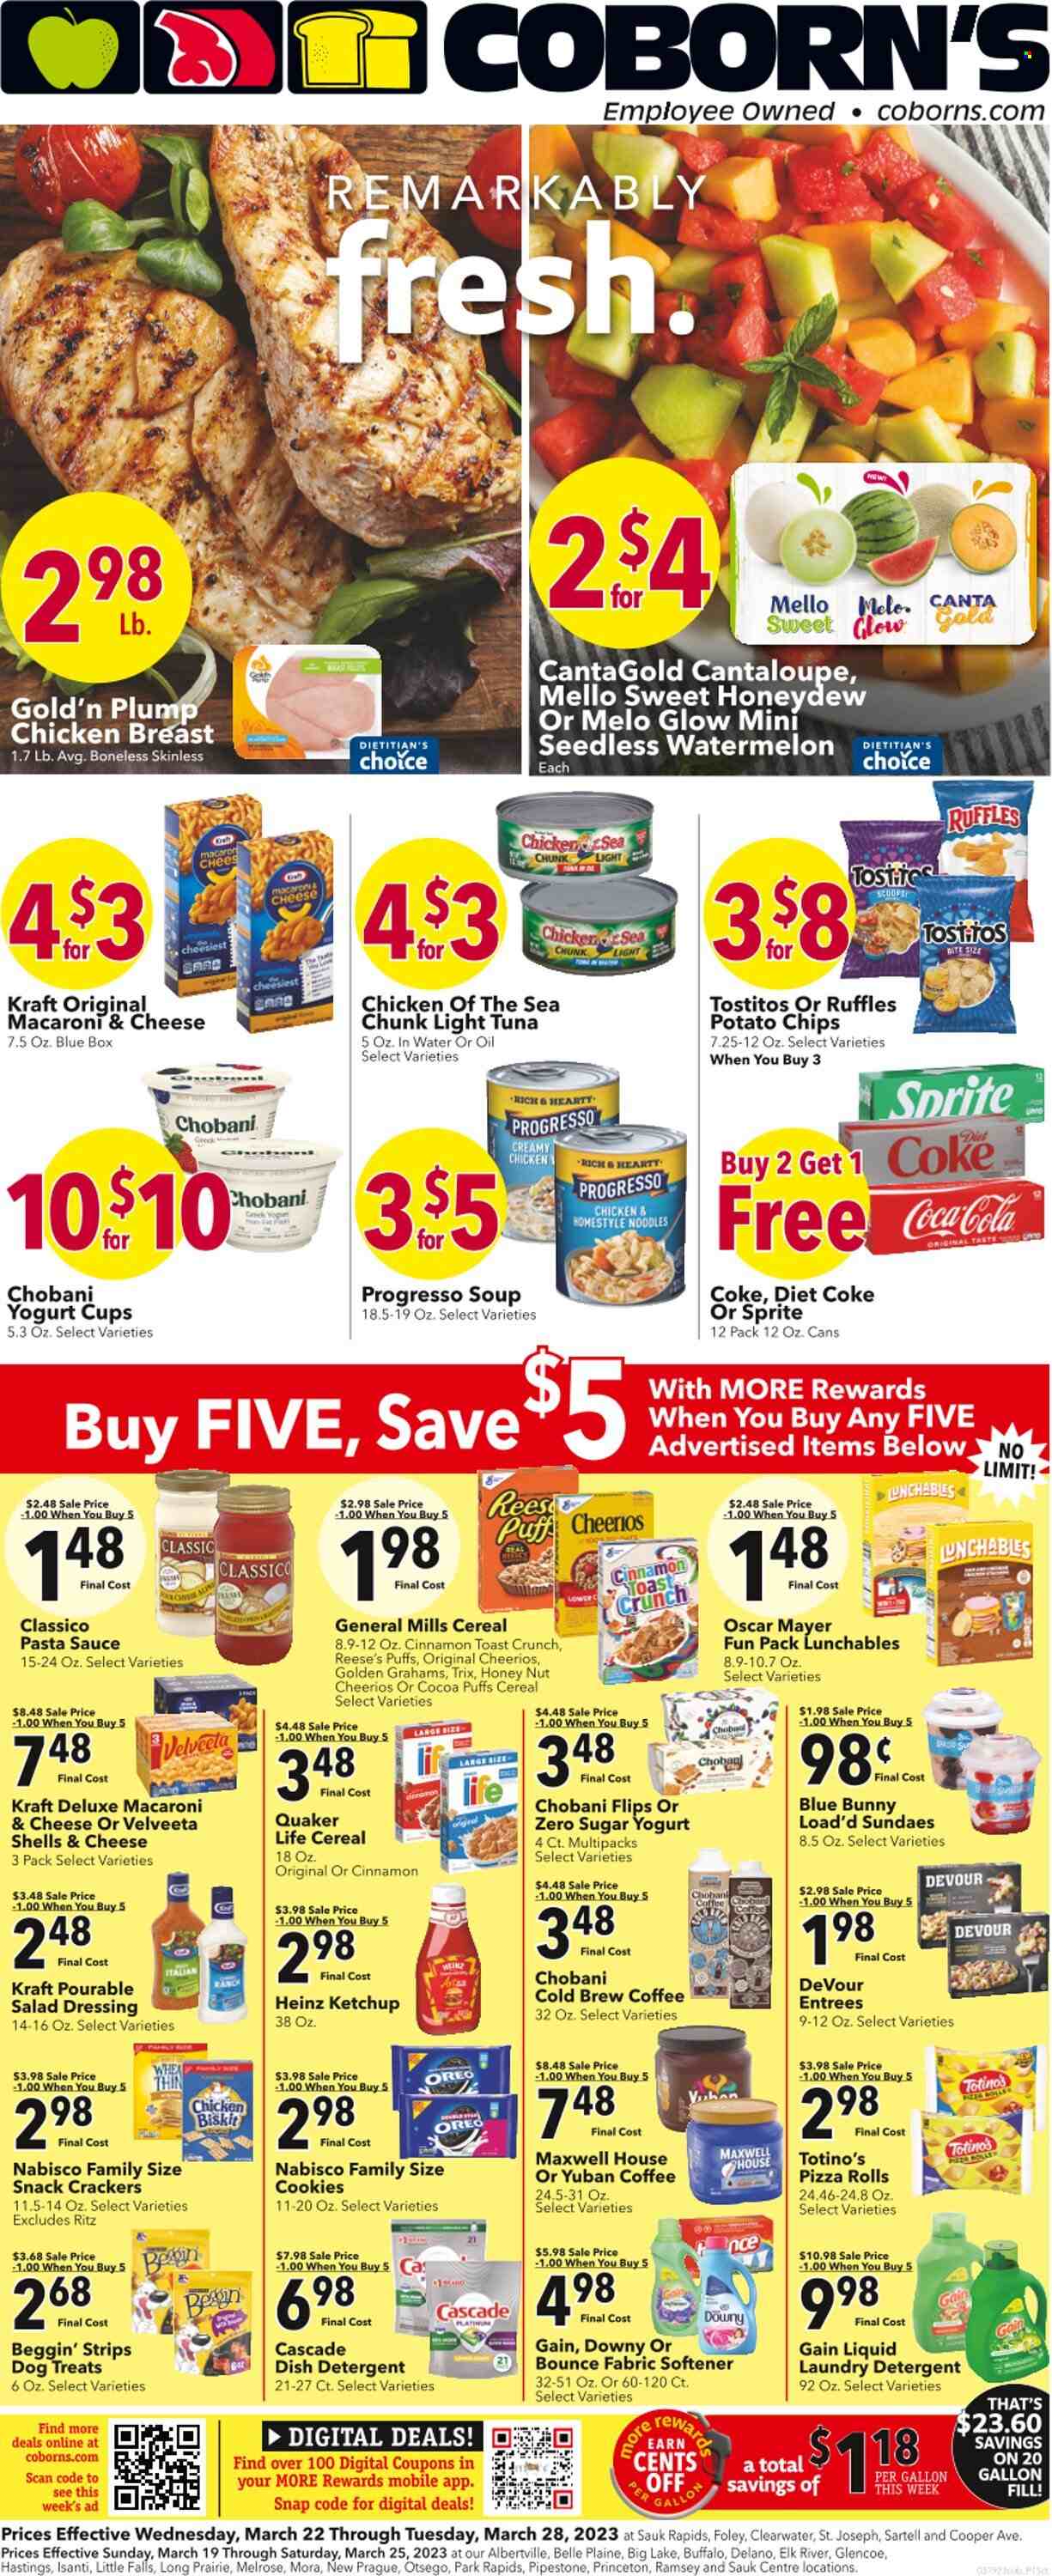 thumbnail - Coborn's Flyer - 03/22/2023 - 03/28/2023 - Sales products - pizza rolls, puffs, macaroons, cantaloupe, snack, honeydew, melons, tuna, macaroni & cheese, pasta sauce, soup, Quaker, noodles, Progresso, Lunchables, Kraft®, ready meal, chicken breasts, Oscar Mayer, Melrose, Velveeta, Oreo, yoghurt, Chobani, Reese's, Blue Bunny, Devour, cookies, crackers, RITZ, Nabisco, General Mills, potato chips, chips, Ruffles, Tostitos, salty snack, canned tuna, Heinz, light tuna, Chicken of the Sea, canned fish, Cheerios, Trix, salad dressing, ketchup, dressing, Coca-Cola, Sprite, Diet Coke, soft drink, Coke, iced coffee, carbonated soft drink, coffee drink, Maxwell House, detergent, Gain, Cascade, fabric softener, laundry detergent, Bounce, dishwashing liquid, animal treats, Beggin', dog treat. Page 1.